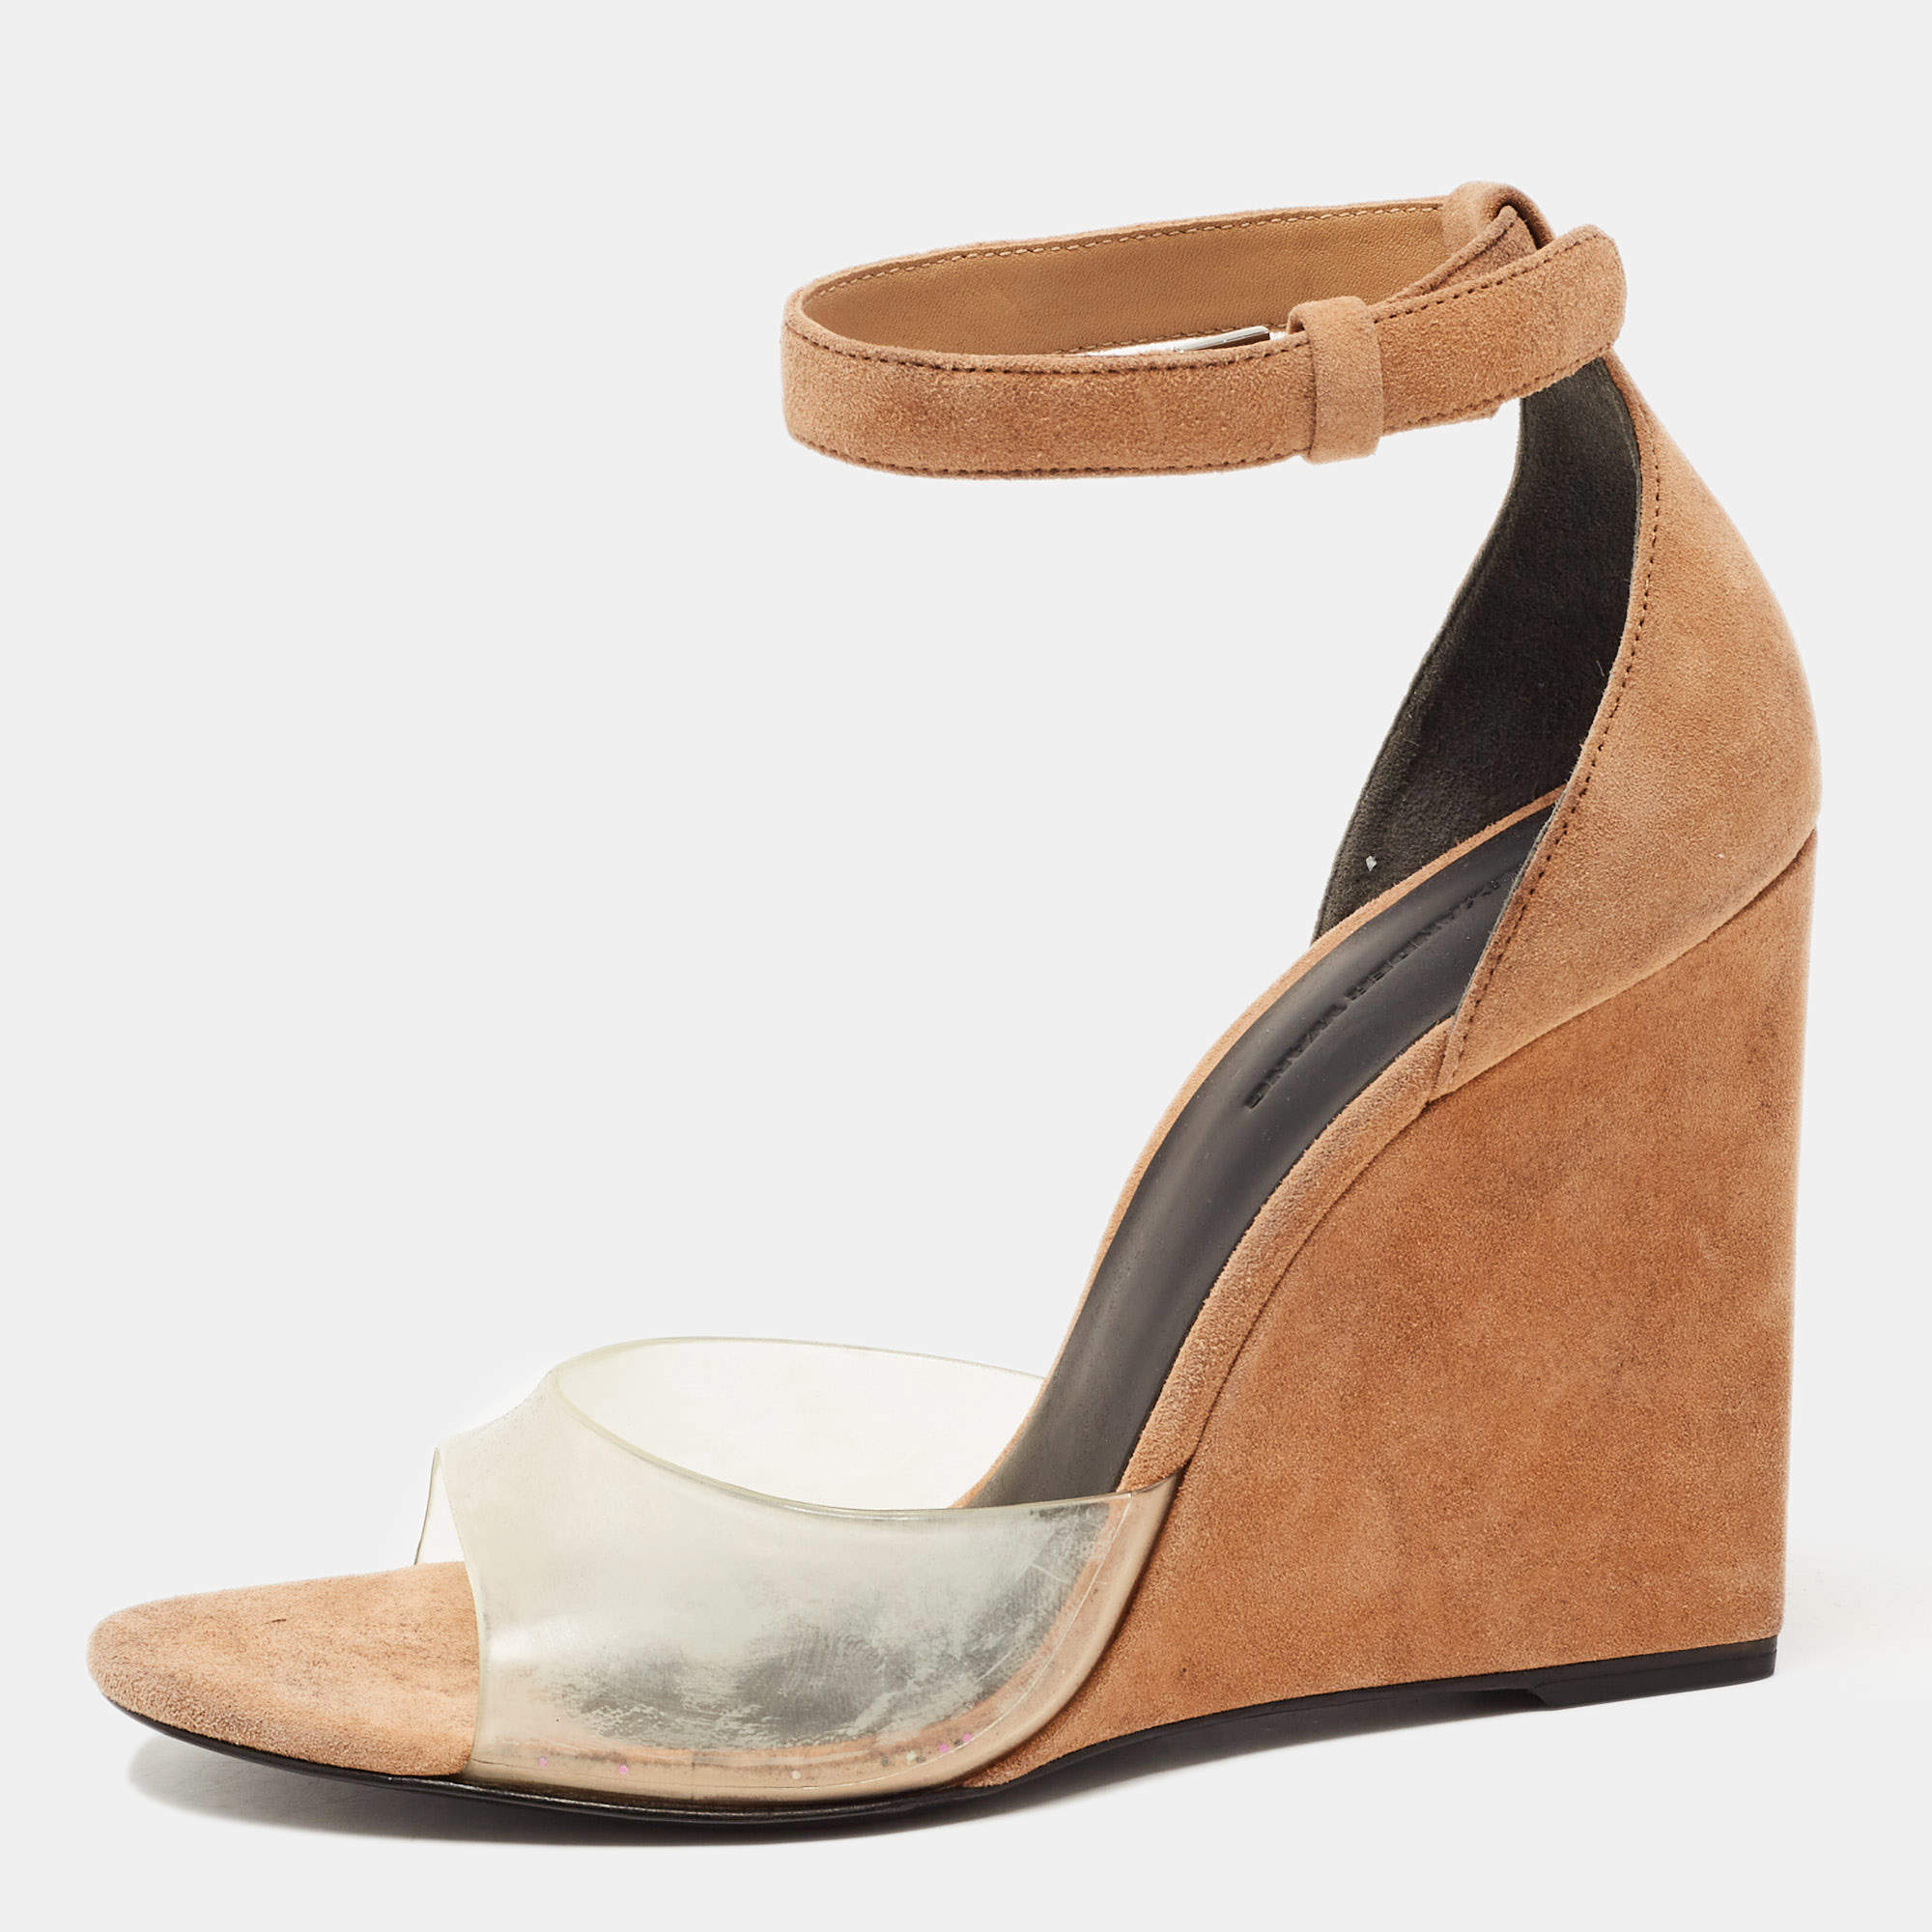 Alexander Wang Beige Suede and PVC Erika Wedge Sandals Size 38.5